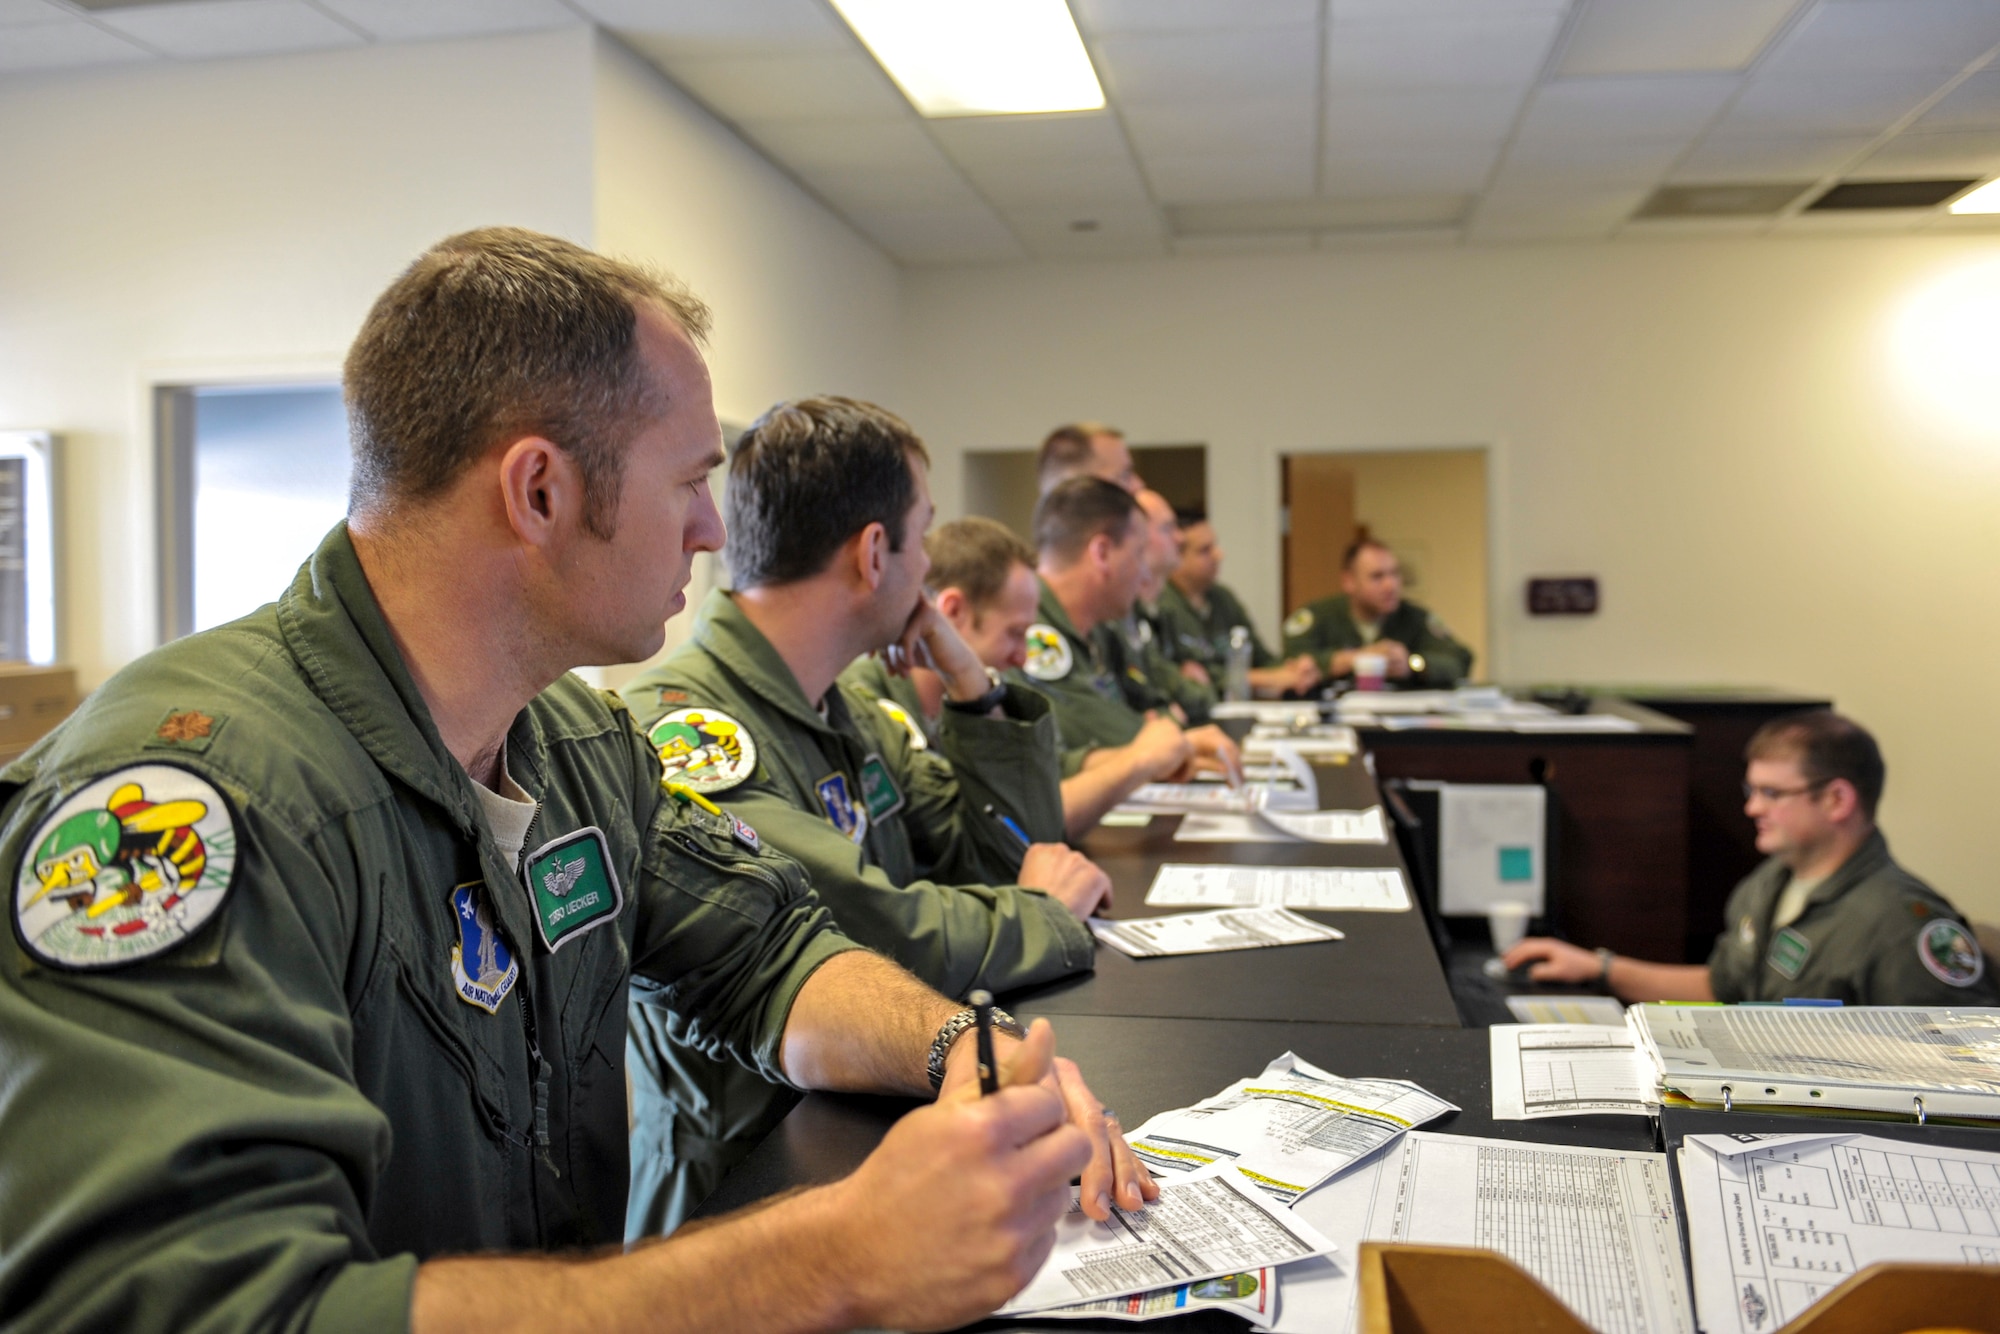 F-16 pilots assigned to the 180th Fighter Wing, Ohio Air National Guard, attend a pre-flight briefing to discuss flight plans and weather patterns during a training exercise at MacDill Air Force Base in Tampa, Florida on Feb. 2, 2017. The 180th brought their F-16s and approximately 150 maintainers, pilots, and operations specialists to MacDill AFB for a two week training exercise which included basic fighter maneuvers against F-18 Hornets from the Canadian 425th Tactical Fighter Squadron, sharpening the combat capabilities of the OANG Airmen. (Air National Guard photo by Tech. Sgt. Nic Kuetemeyer)